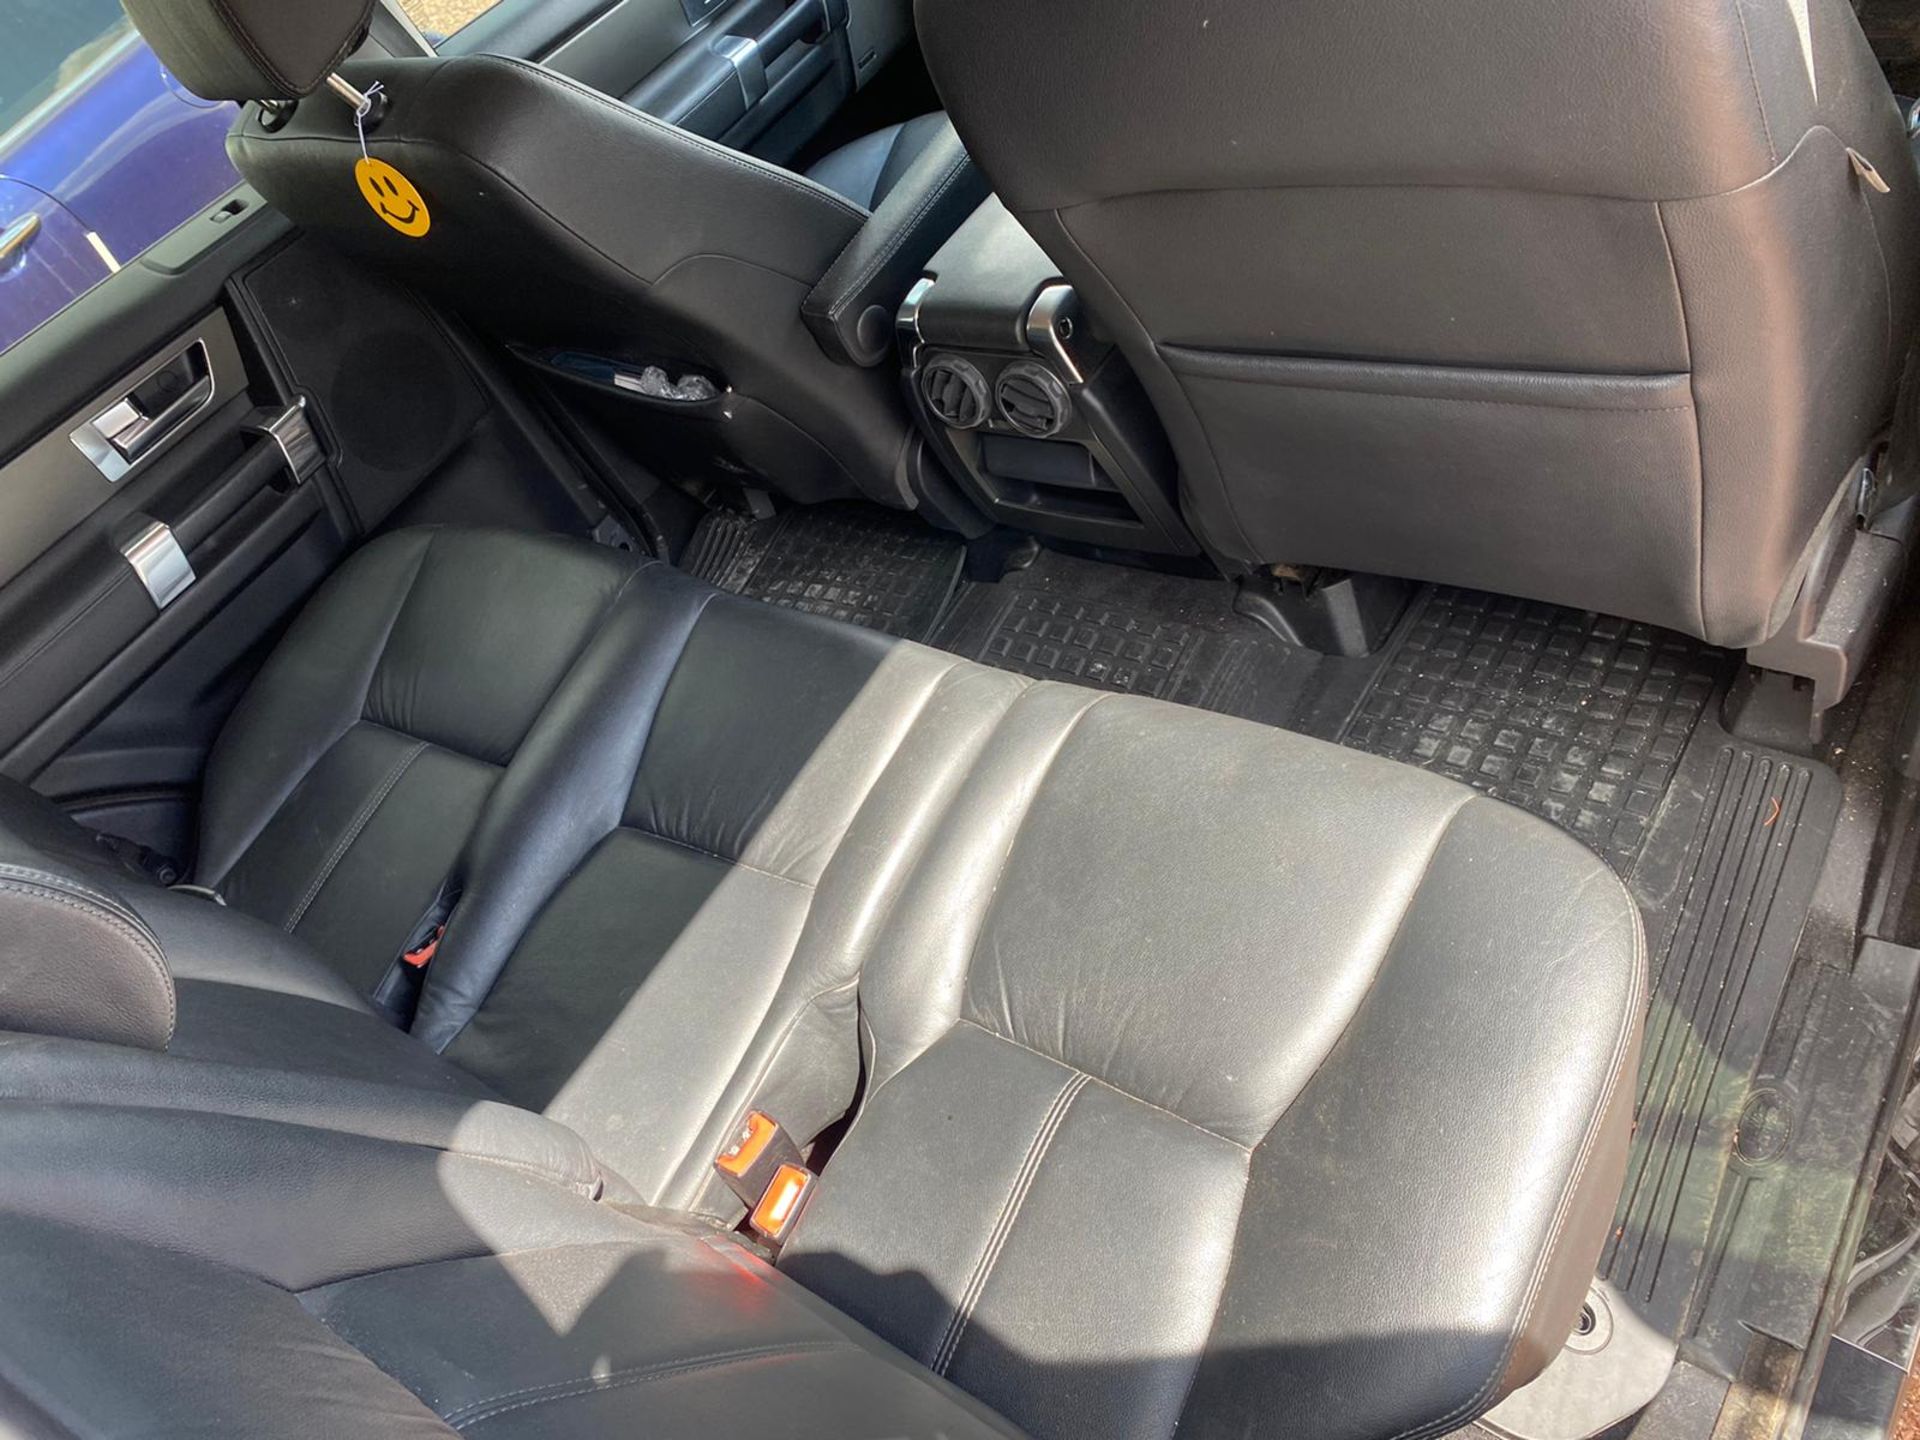 2015 LAND ROVER DISCOVERY XS SDV6 AUTO BLACK CONVERTED COMMERCIAL – WITH REAR SEAT CONVERSION - Image 13 of 16